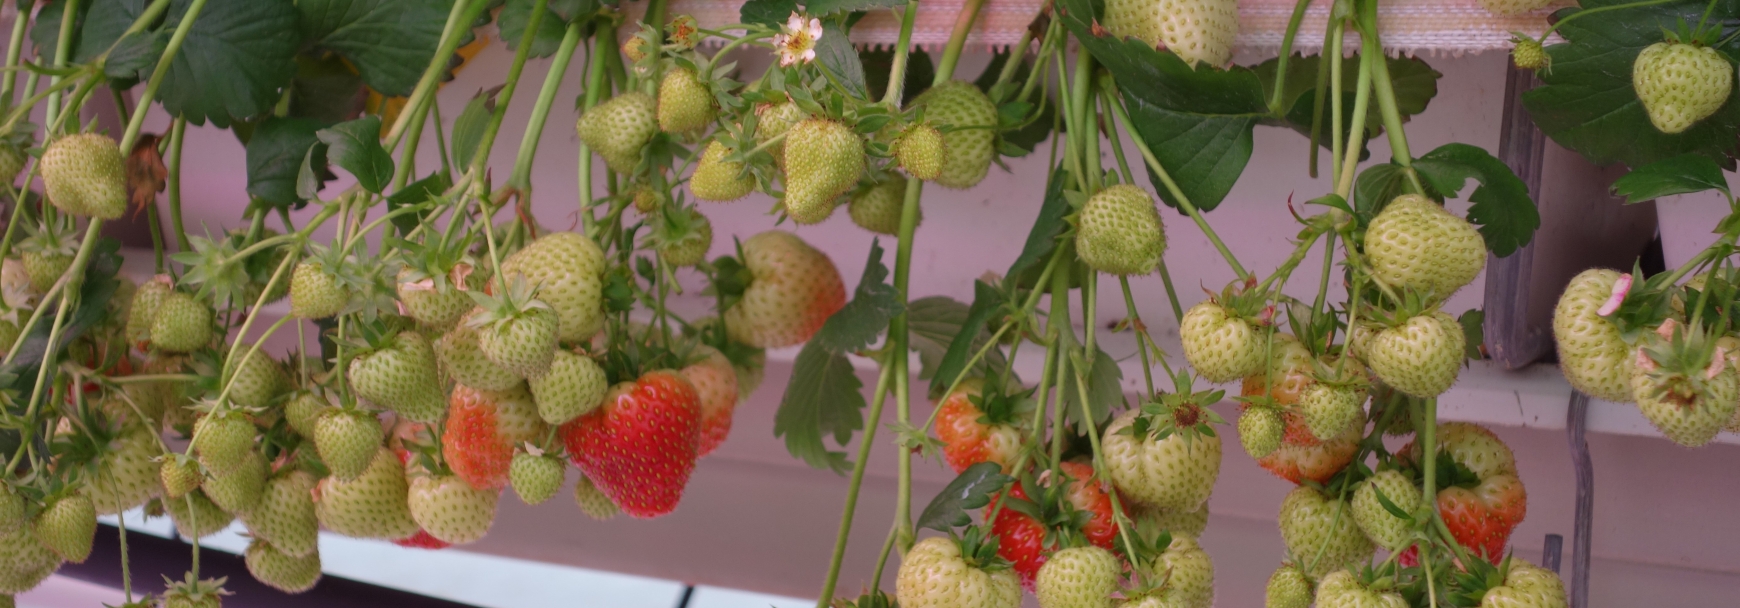 Strawberries growing in a greenhouse